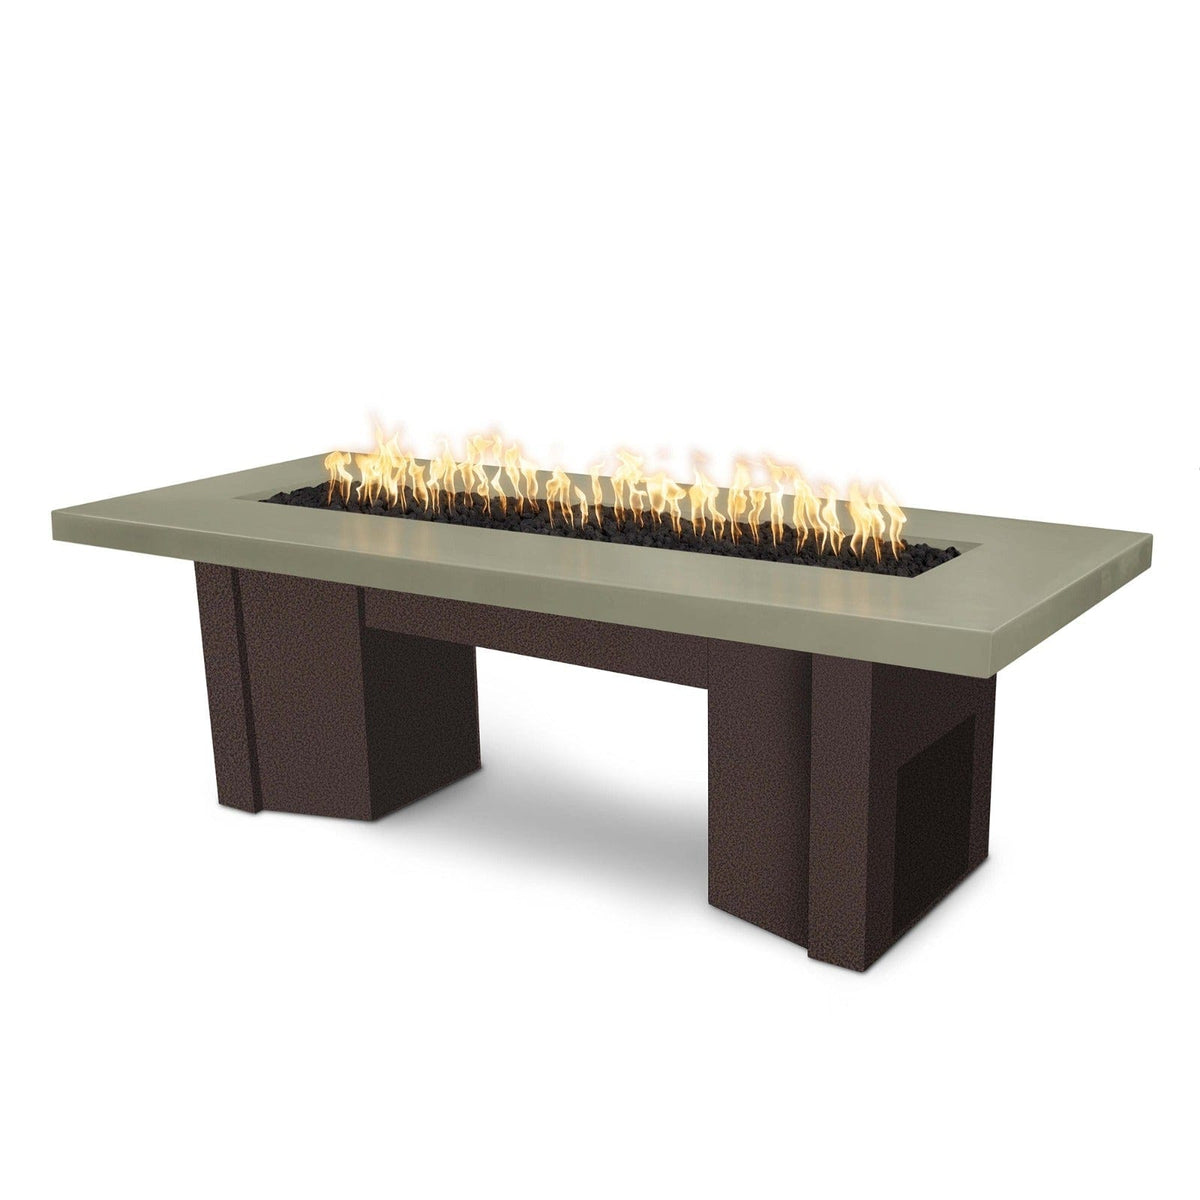 The Outdoor Plus Fire Features Ash (-ASH) / Copper Vein Powder Coated Steel (-CPV) The Outdoor Plus 78&quot; Alameda Fire Table Smooth Concrete in Liquid Propane - 110V Plug &amp; Play Electronic Ignition / OPT-ALMGFRC78EKIT-LP